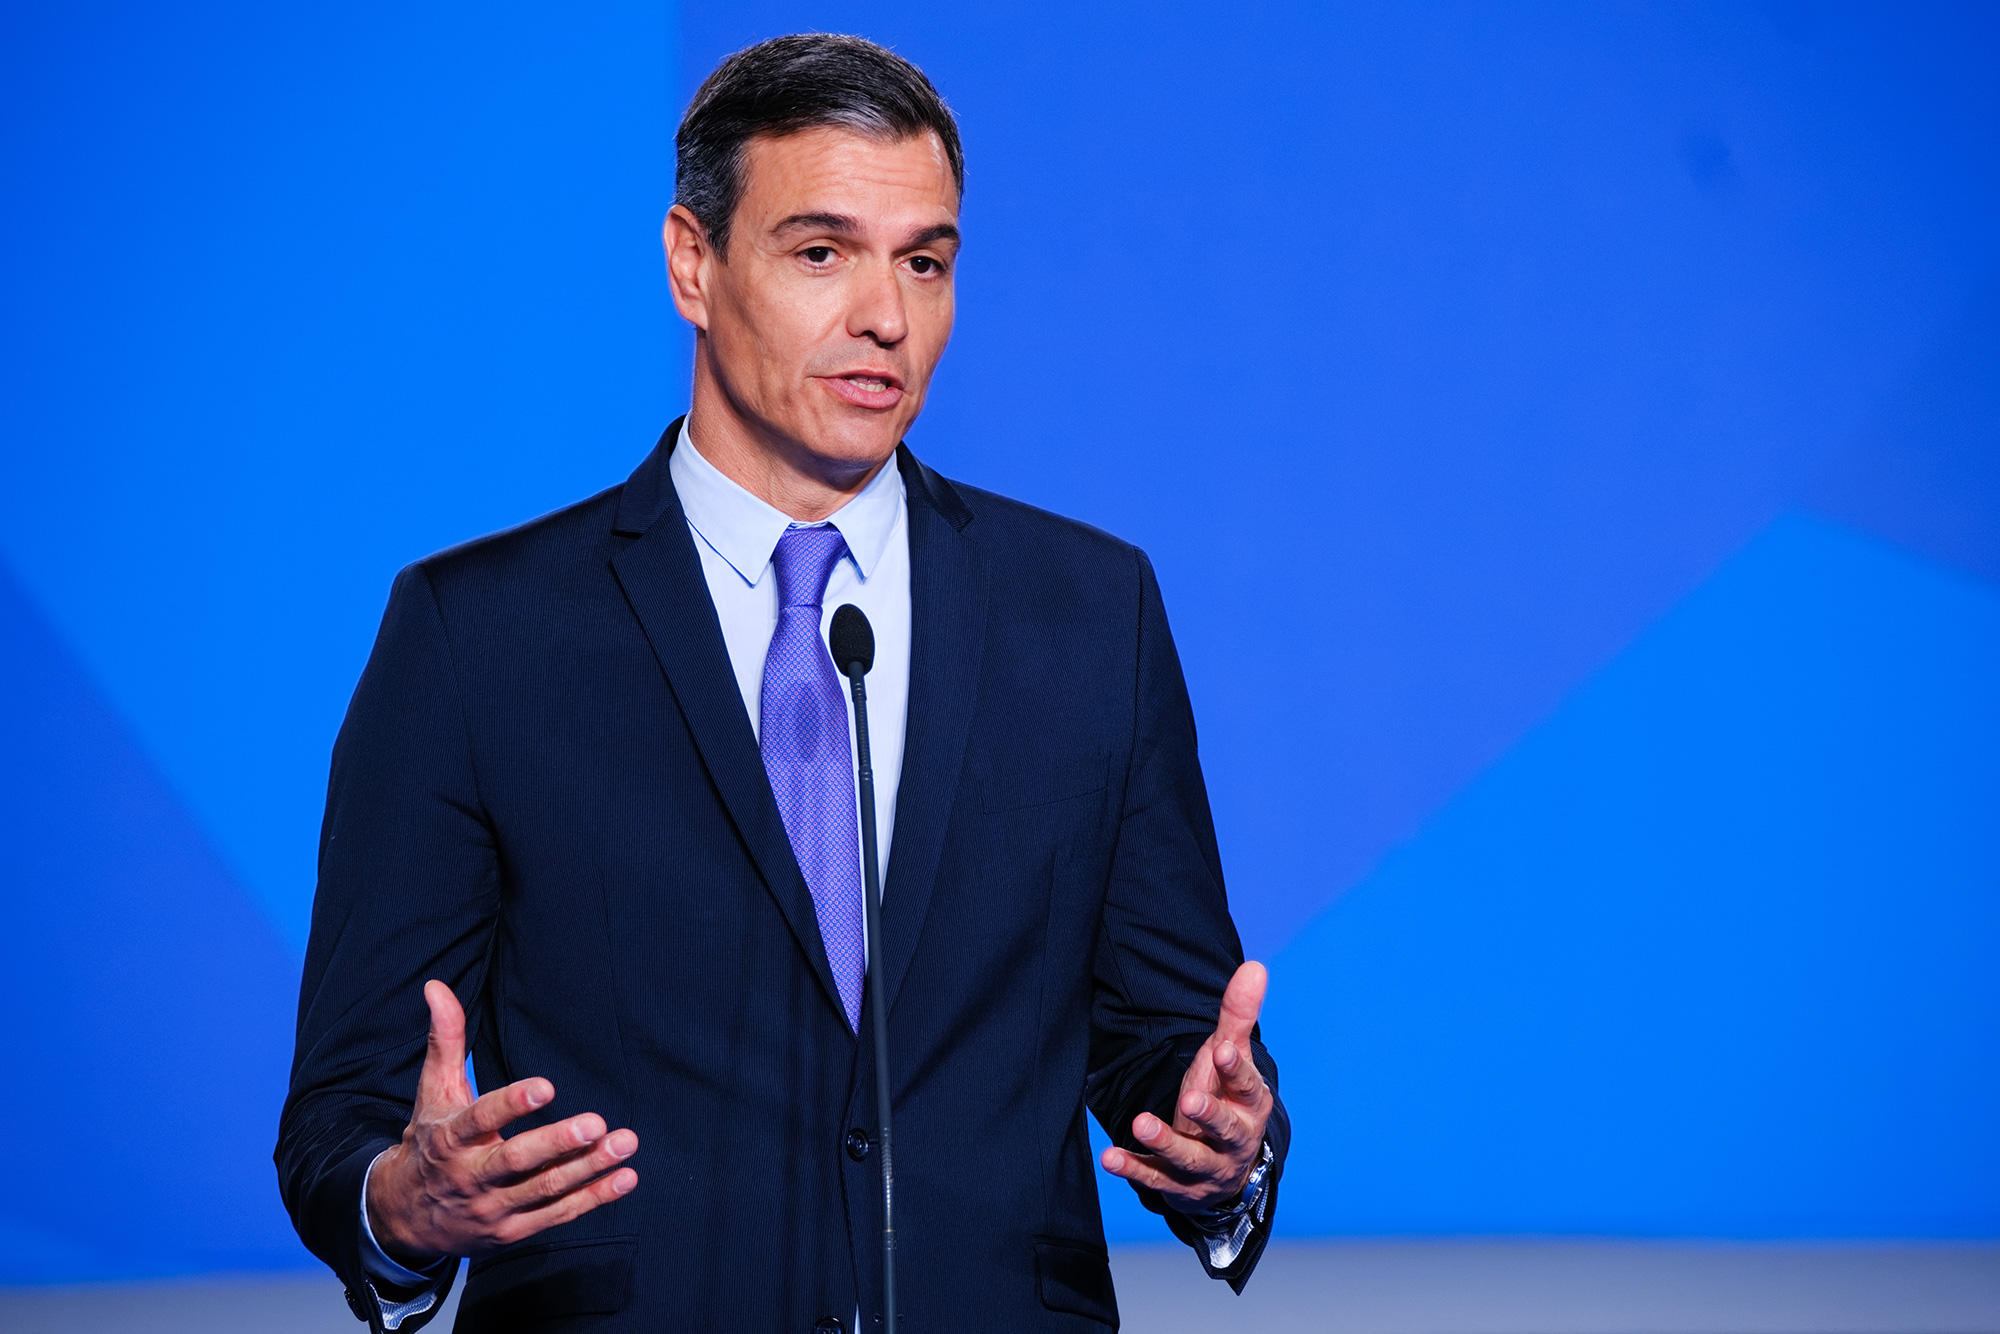 Spanish Prime Minister Pedro Sanchez speaks at the NATO summit in Madrid, Spain on Tuesday 28 June.